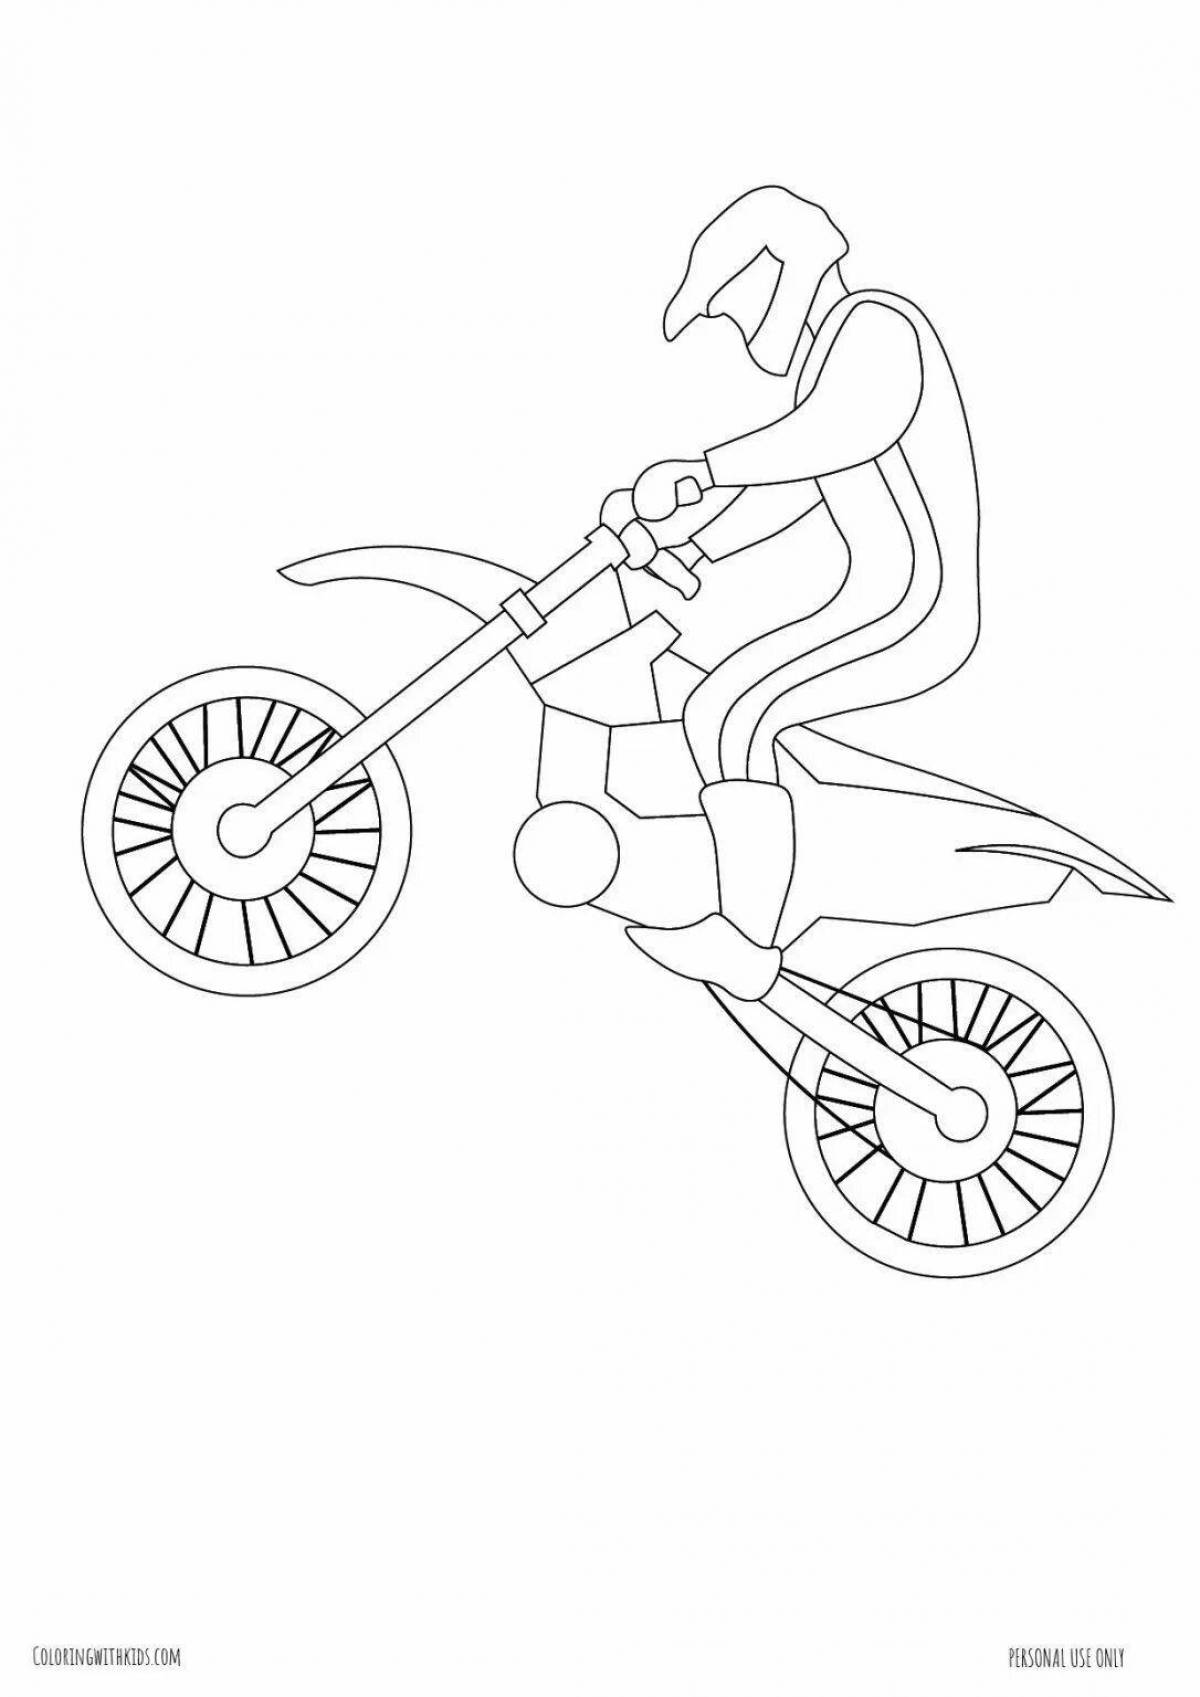 Amazing motocross coloring page